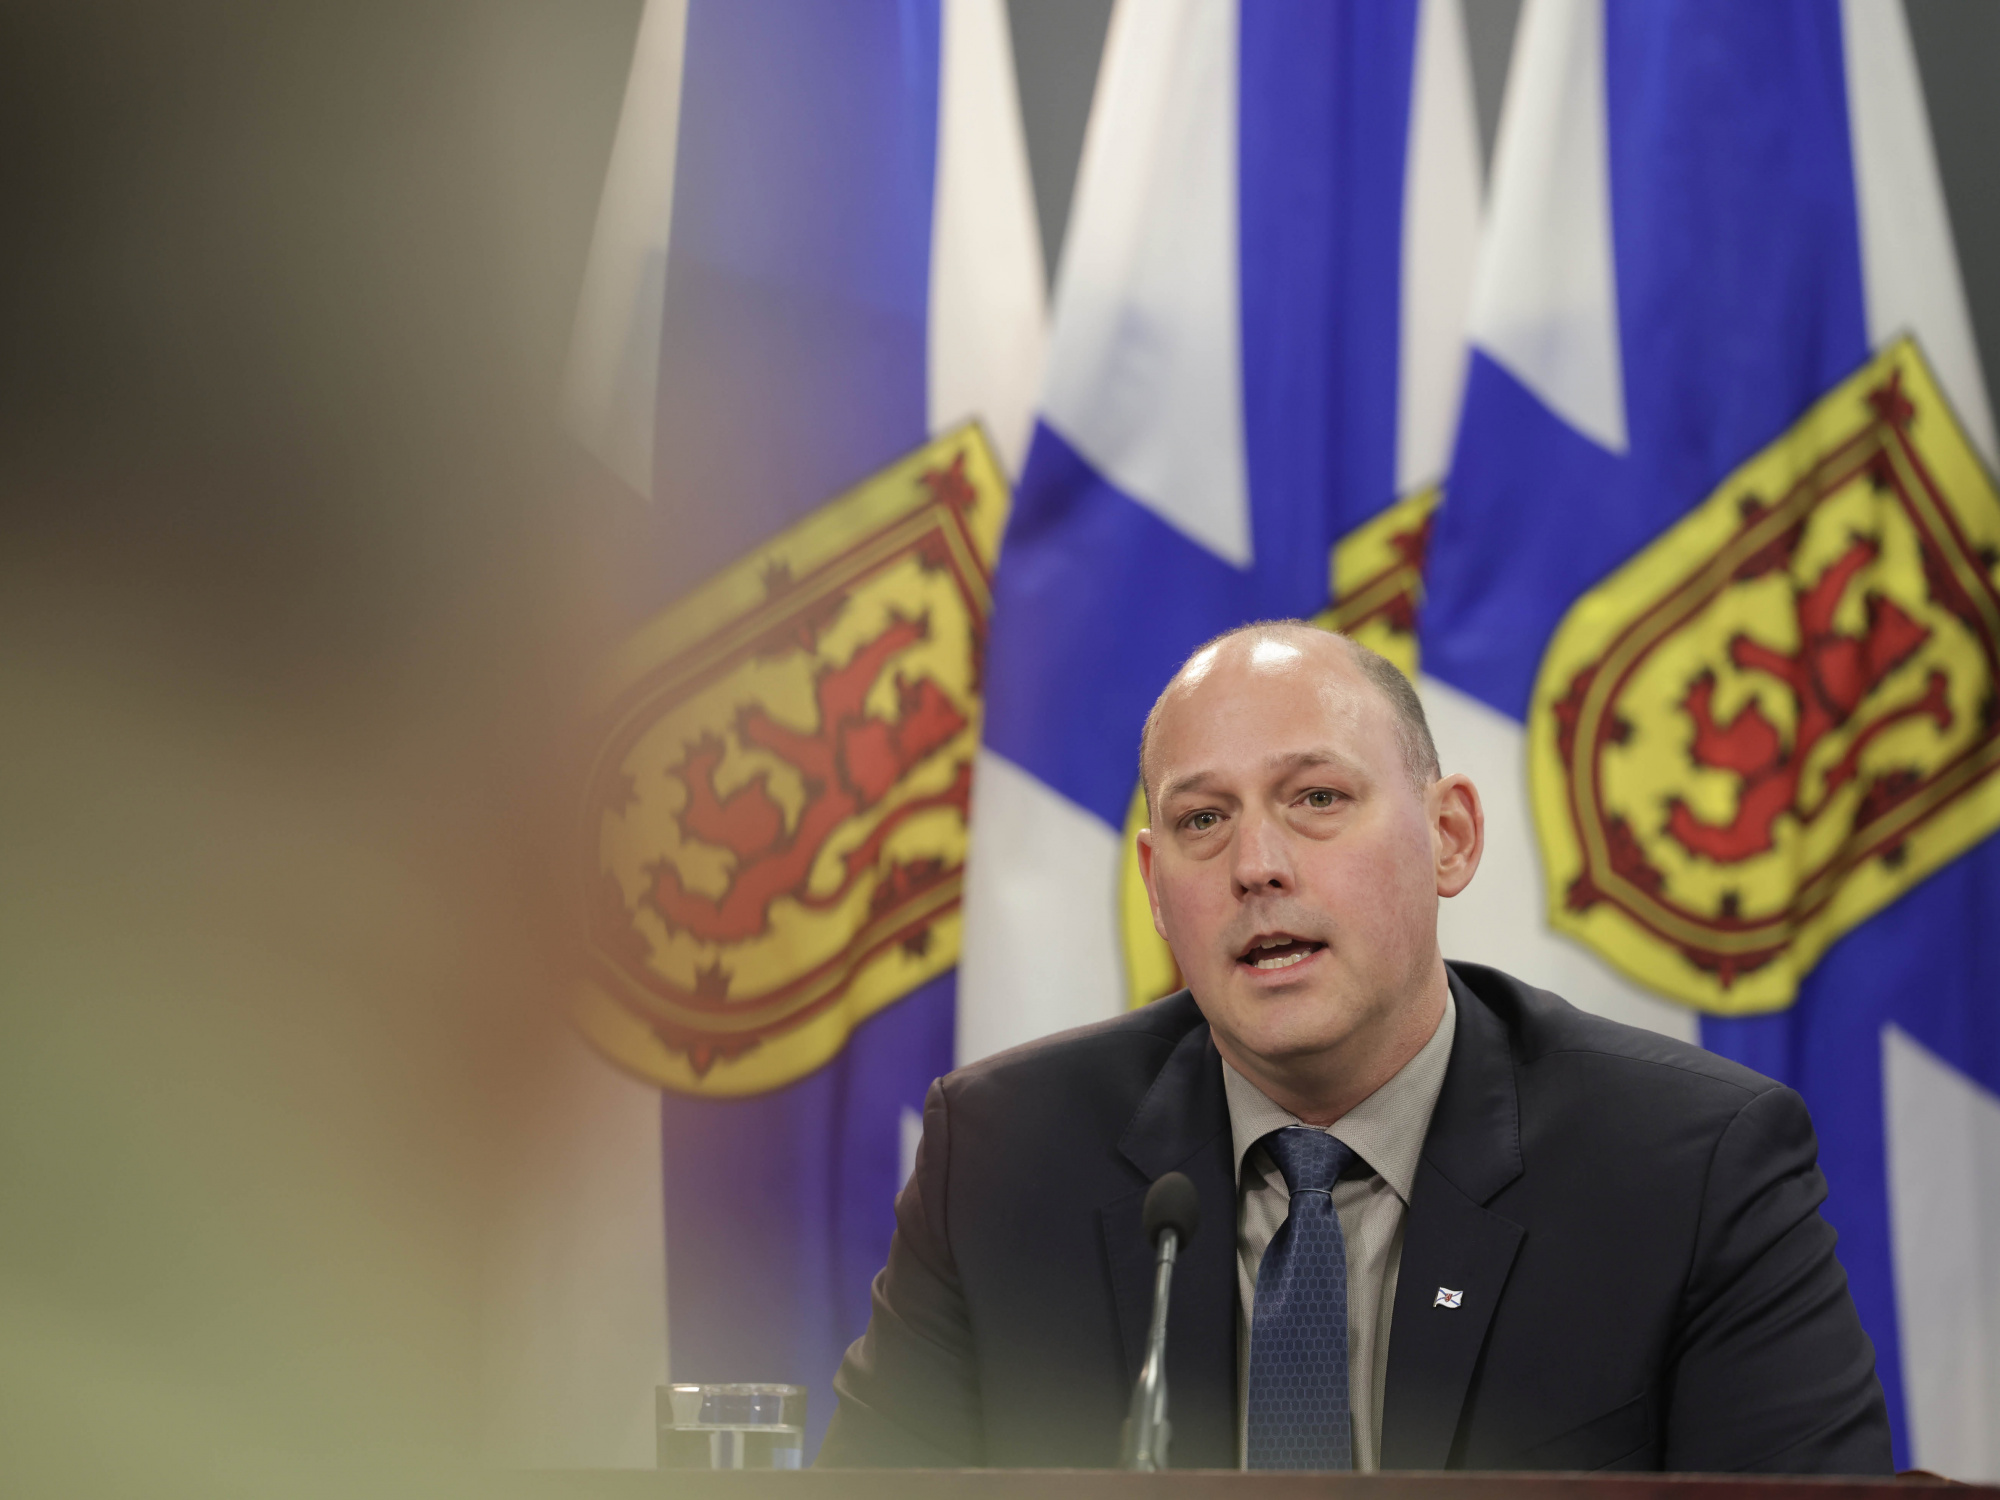 Timothy Halman, Minister of Environment and Climate Change speaks during the announcement. (Communications Nova Scotia)